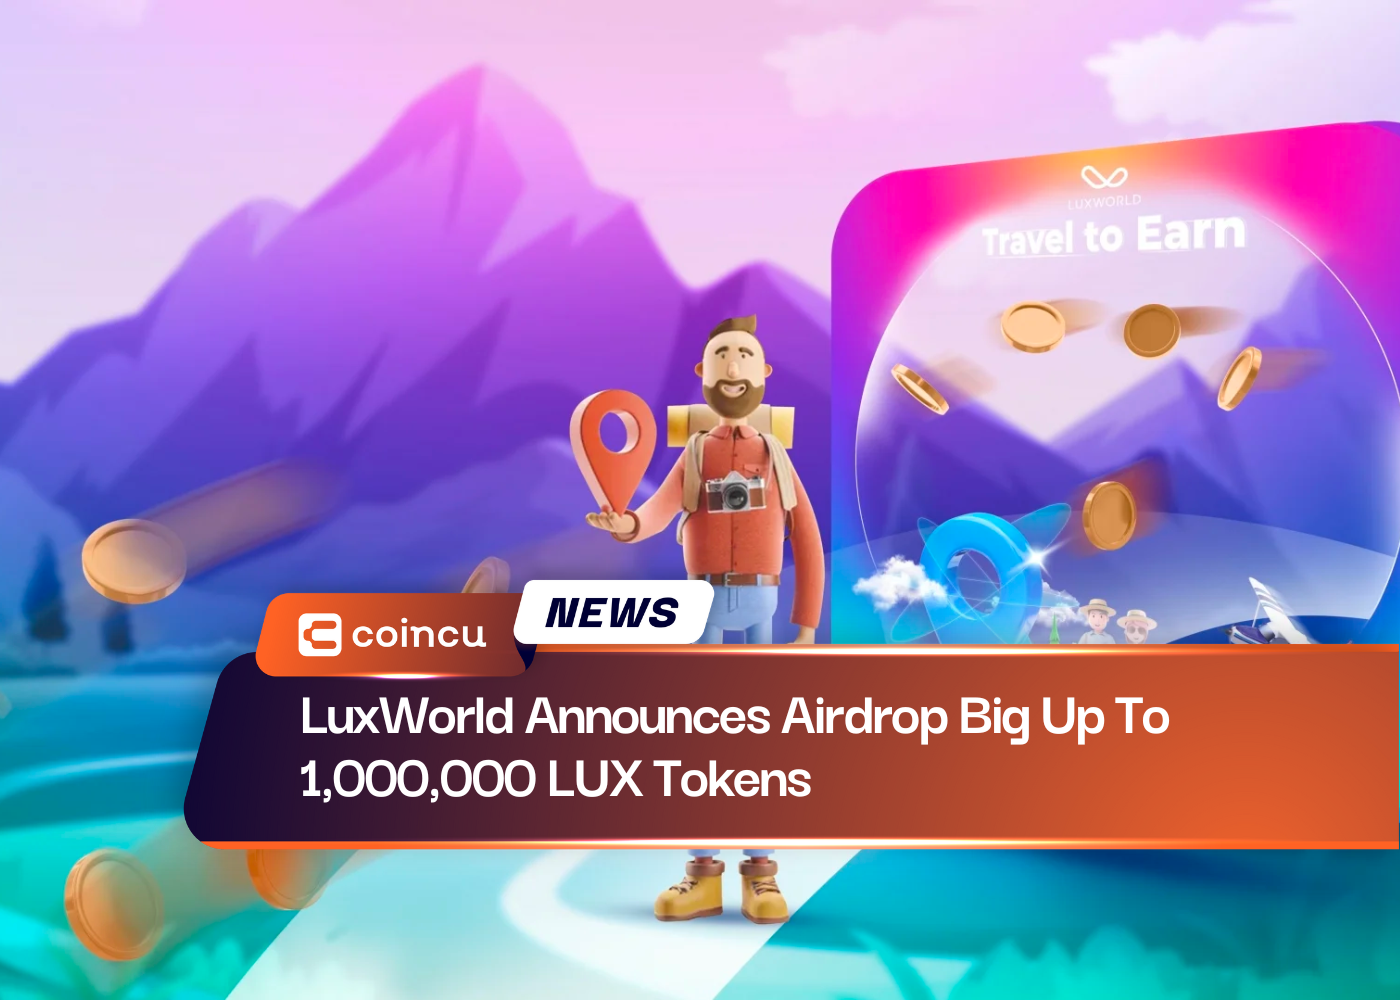 LuxWorld Announces Airdrop Big Up To 1,000,000 LUX Tokens